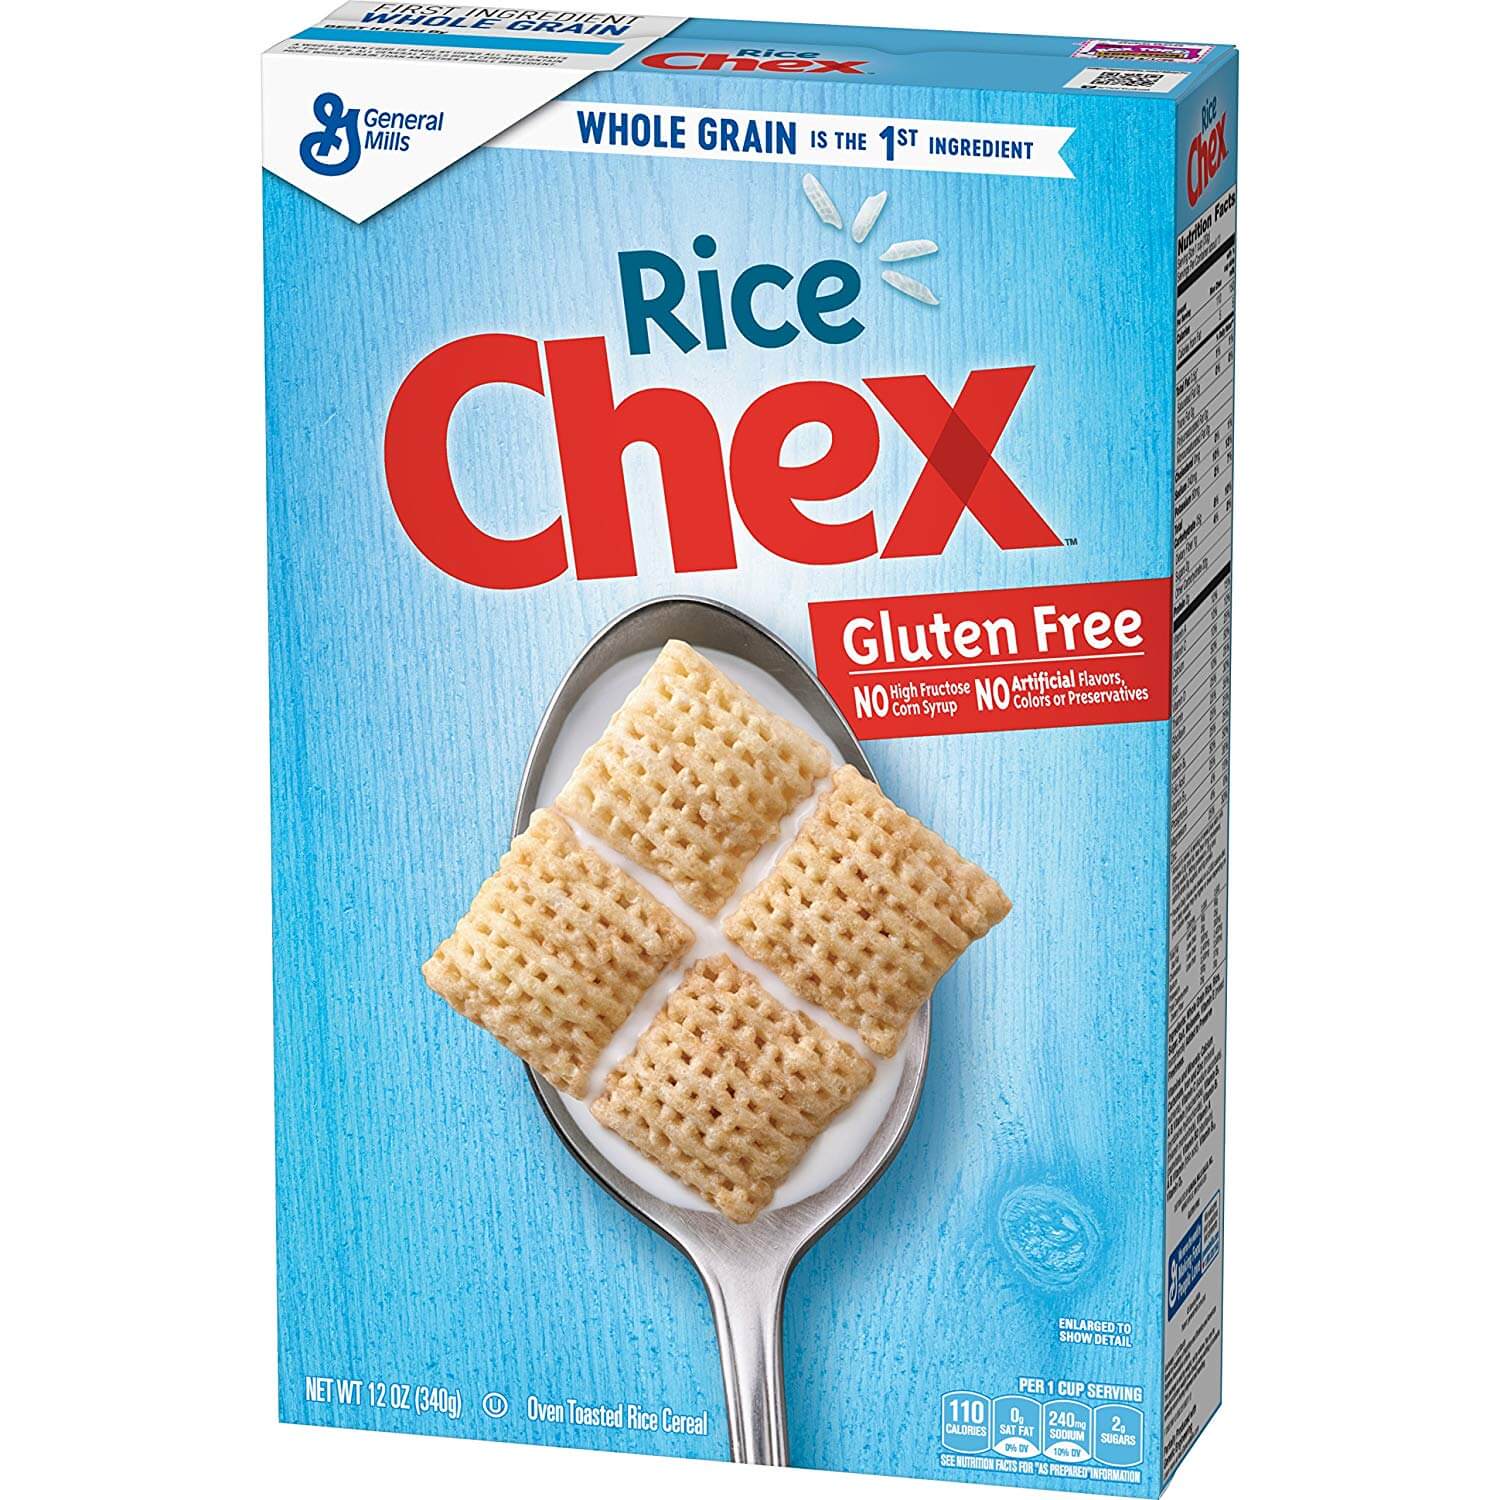 Rice Chex Gluten-Free Cereal